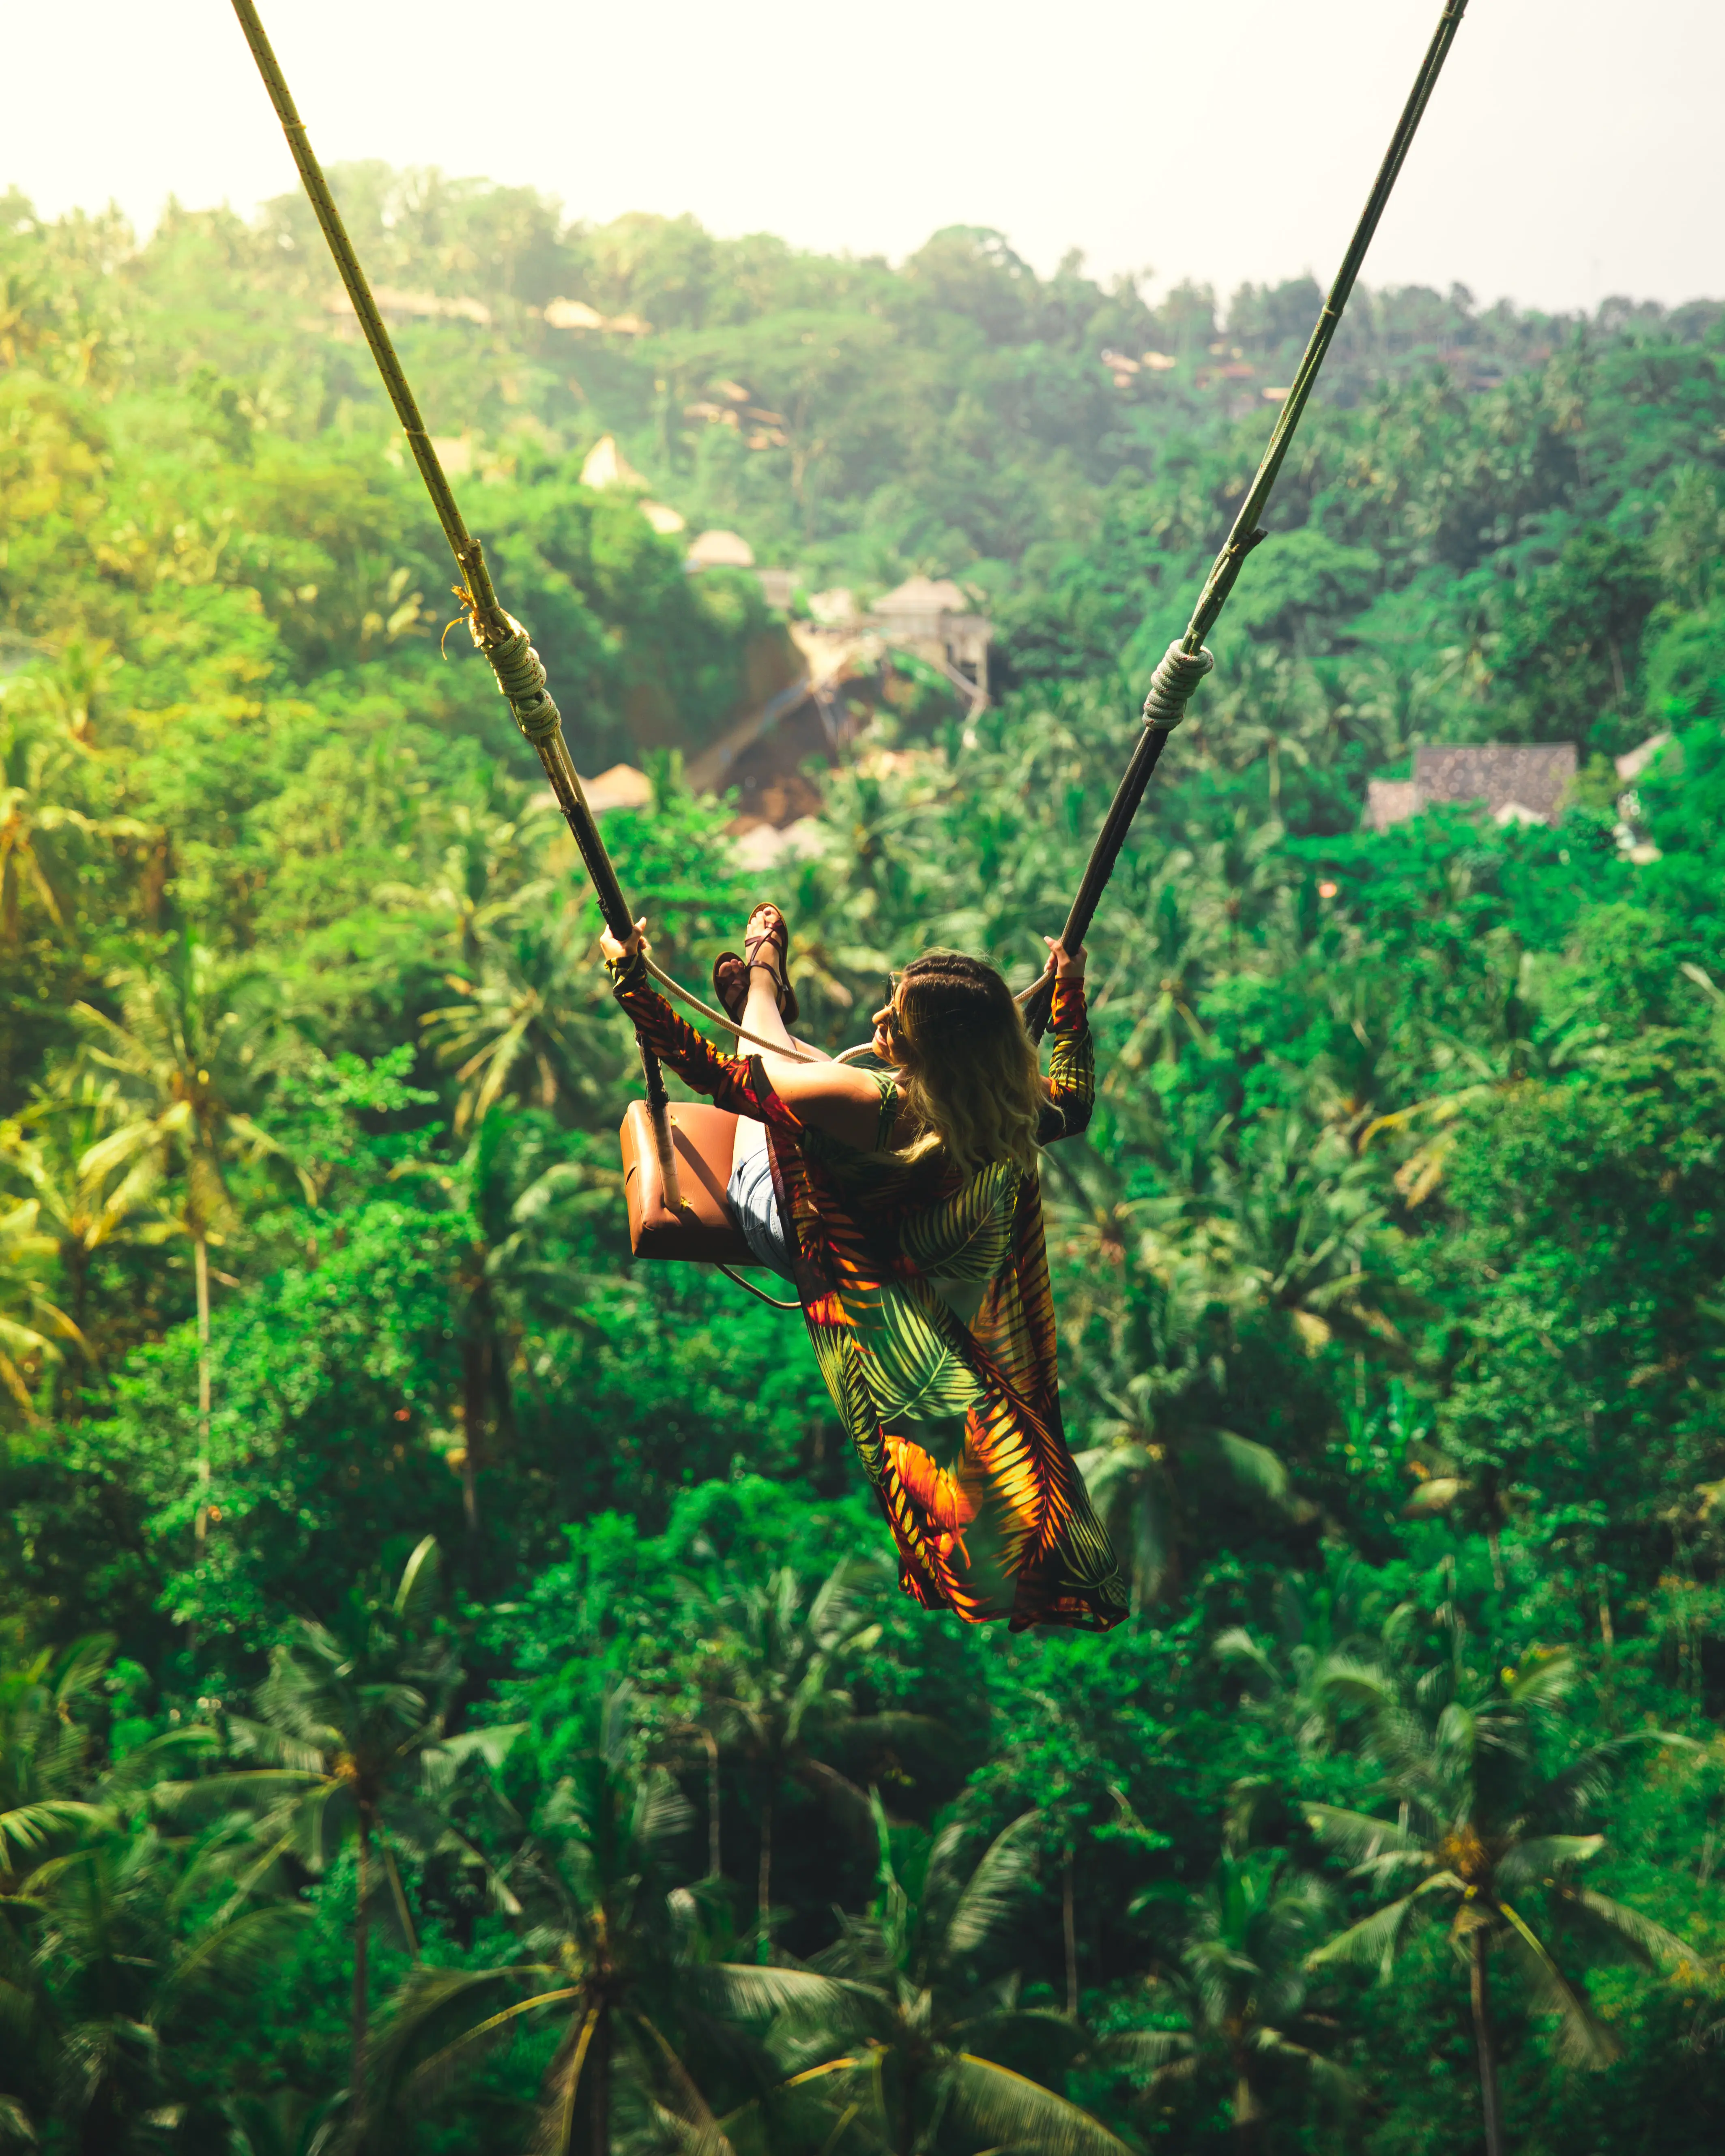 Instagram tour with swings in Bali